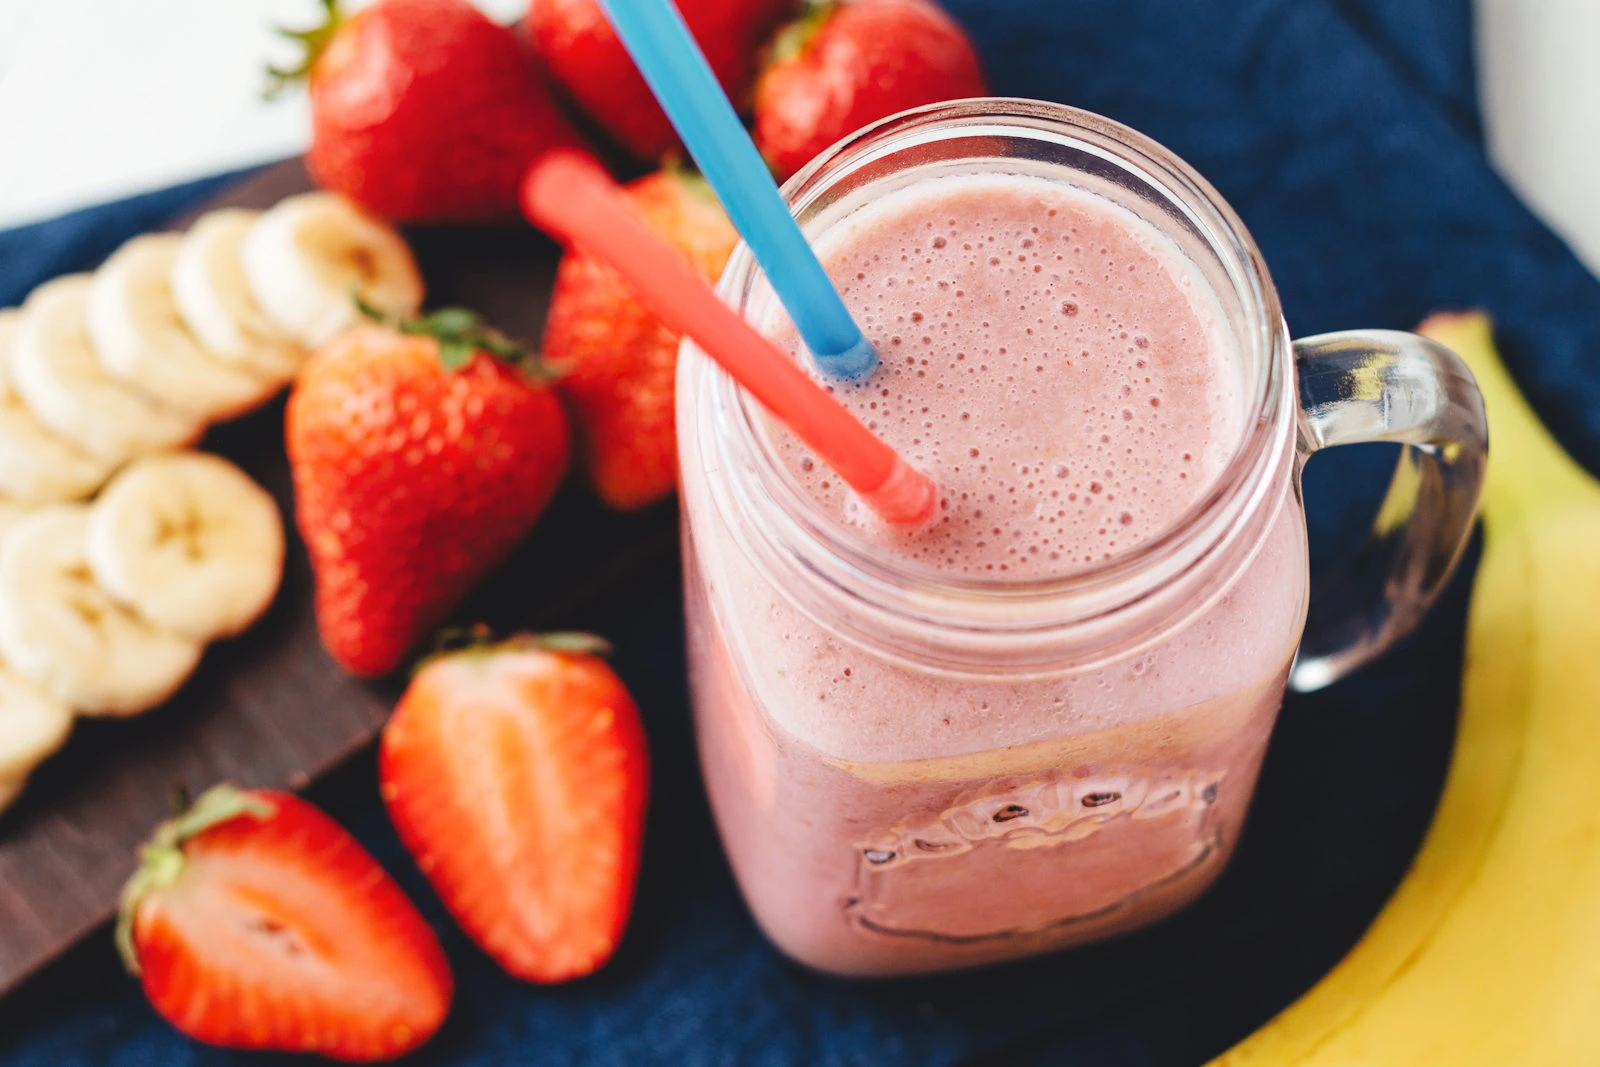 Strawberry Oatmeal Smoothie Makes You Full Longer